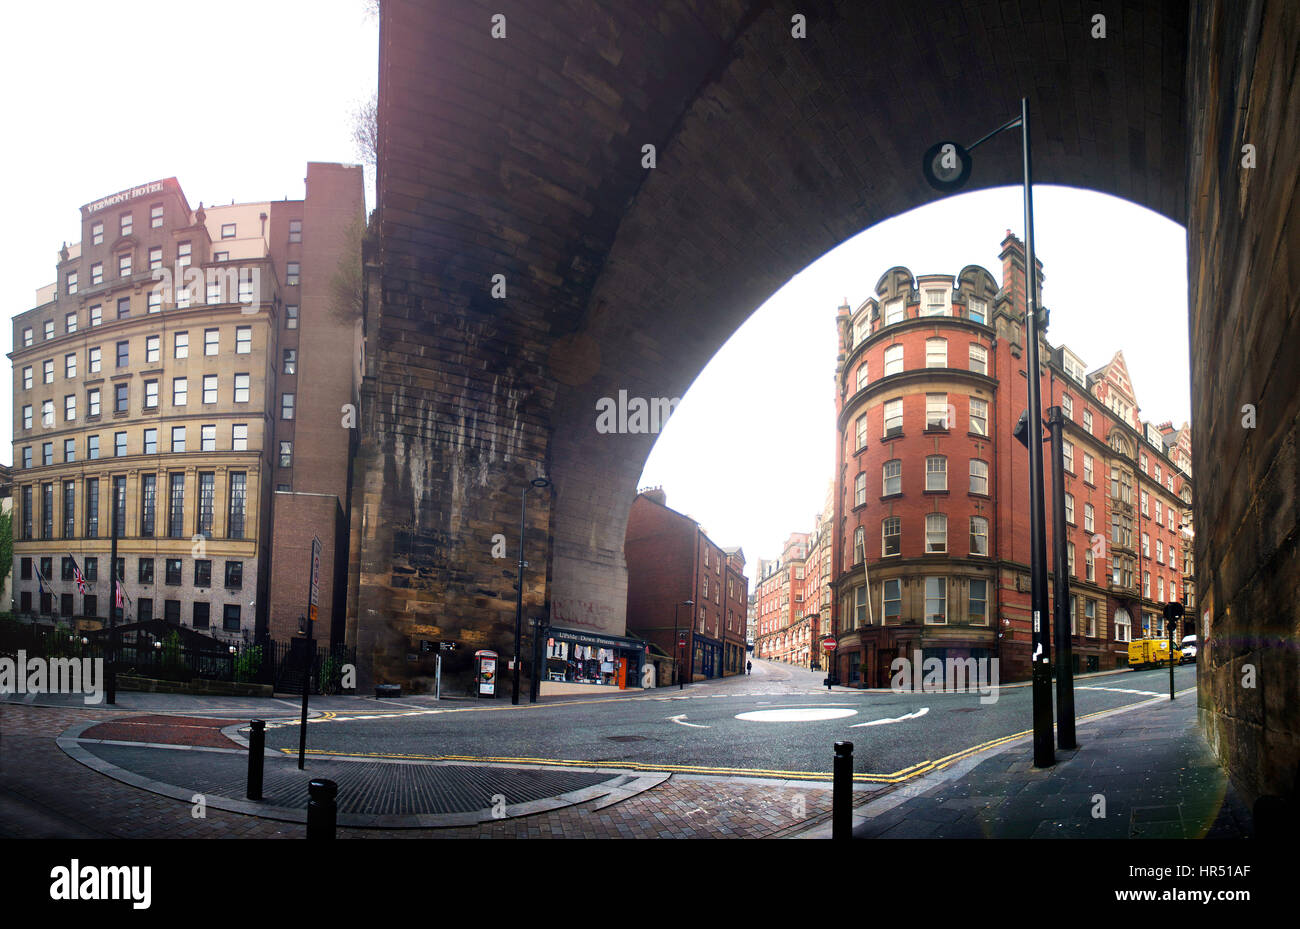 Panoramic View Of Dean Street And Side Newcastle Upon Tyne HR51AF 